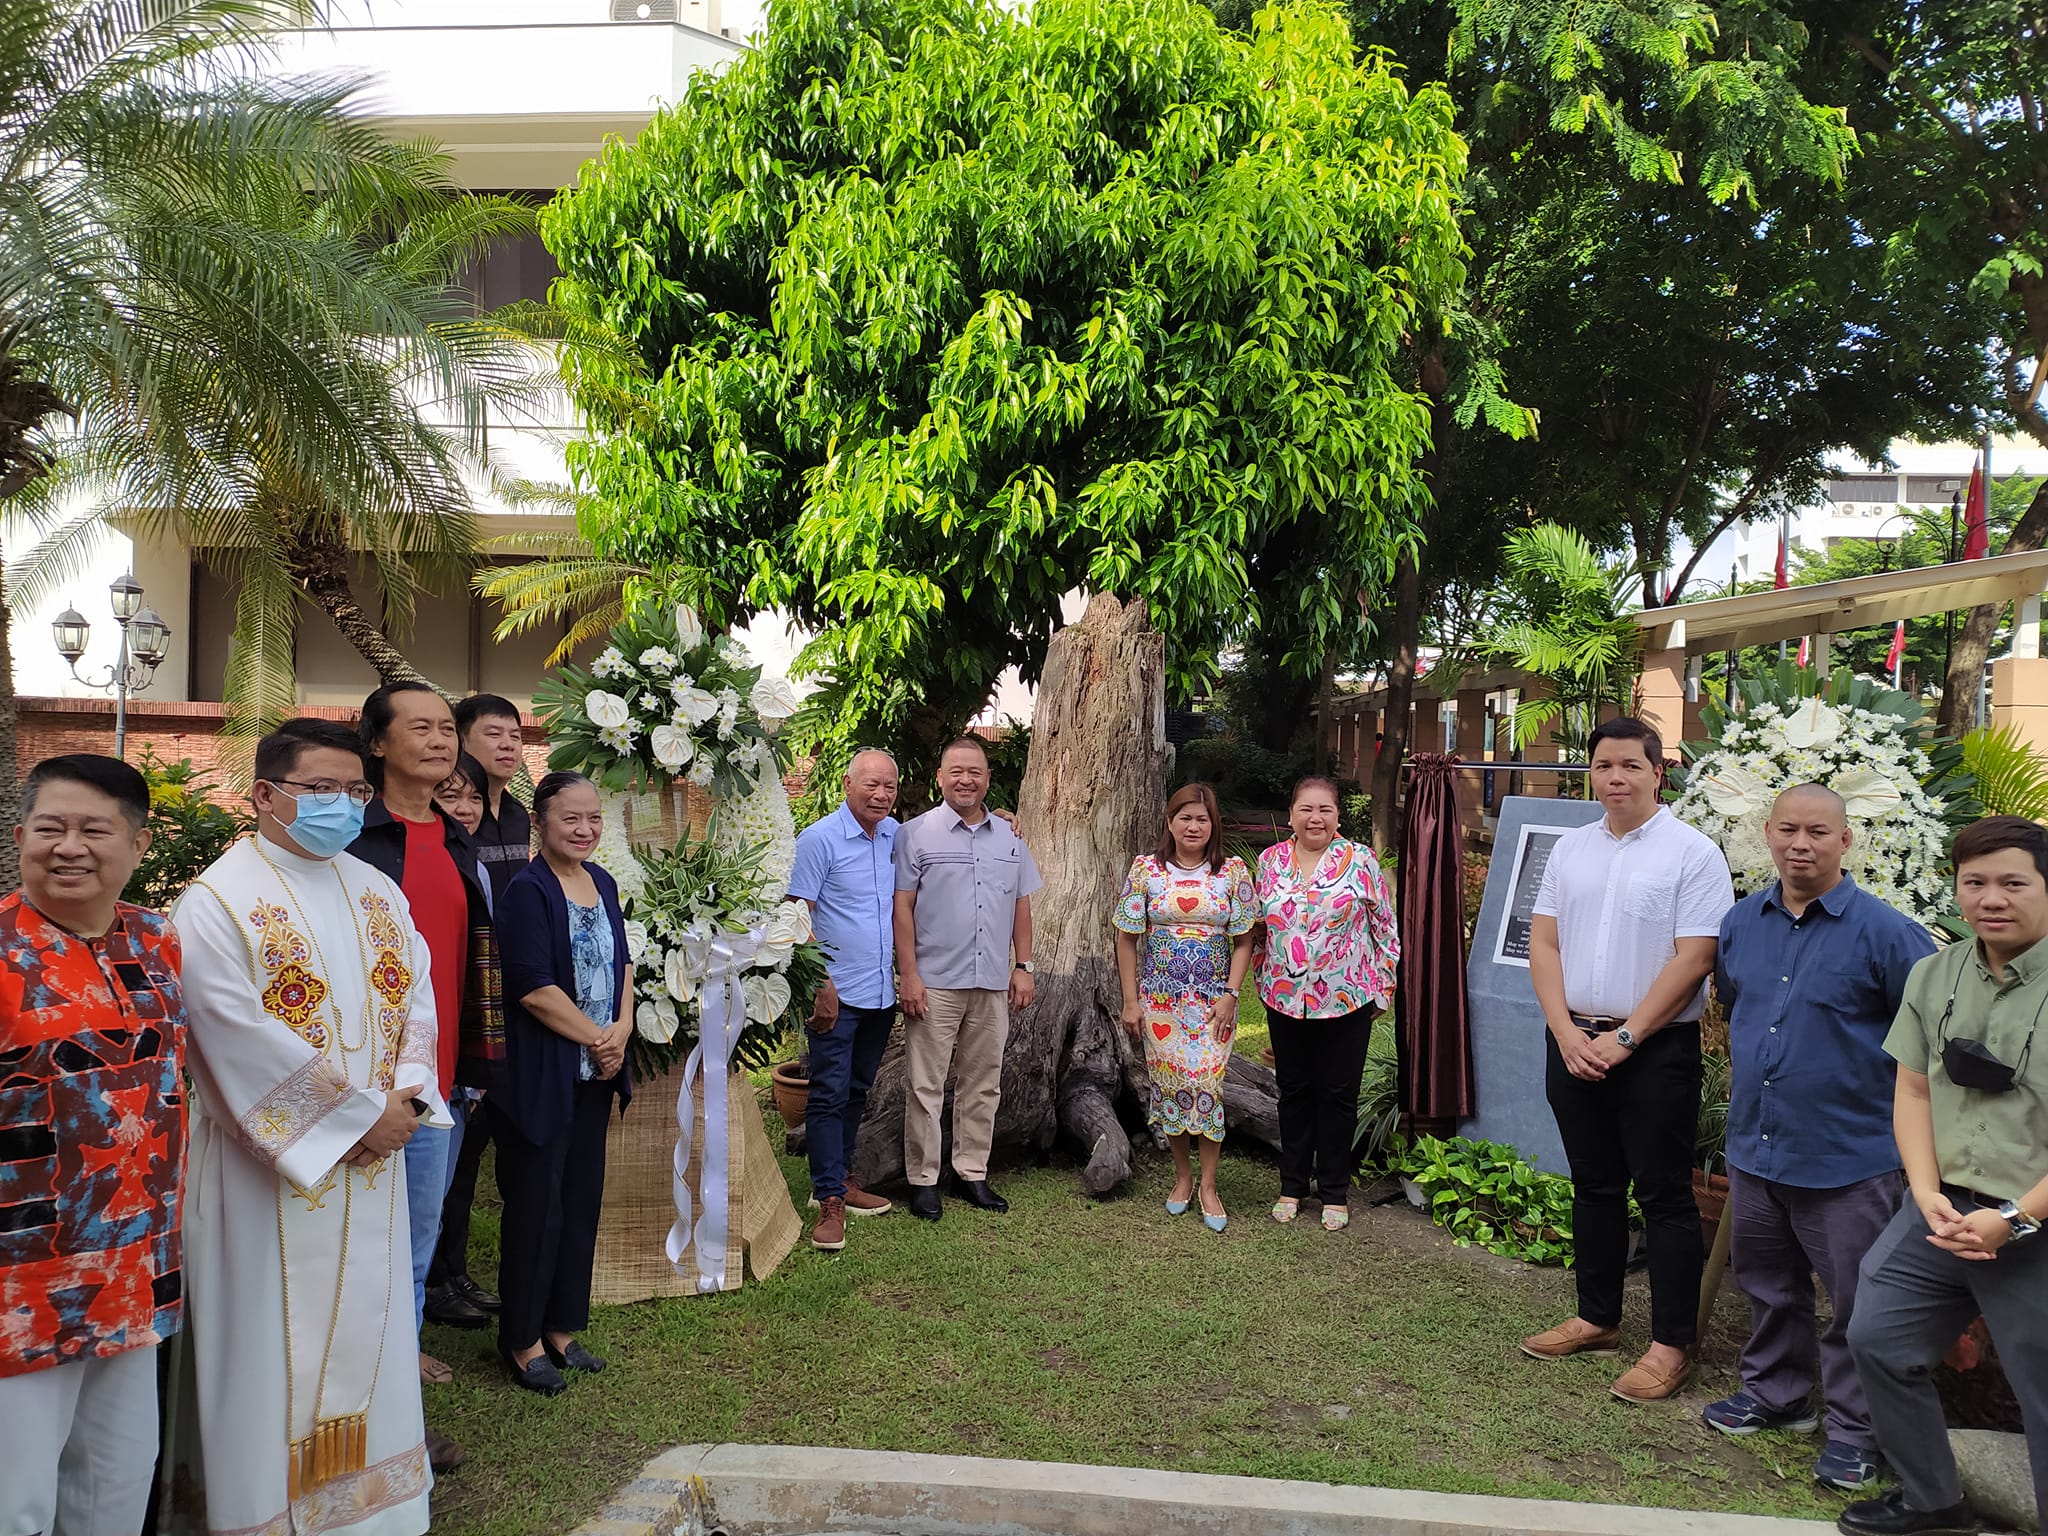 Pampangas 1st Pinatubo Memorial Marker Unveiled Punto Central Luzon 2627